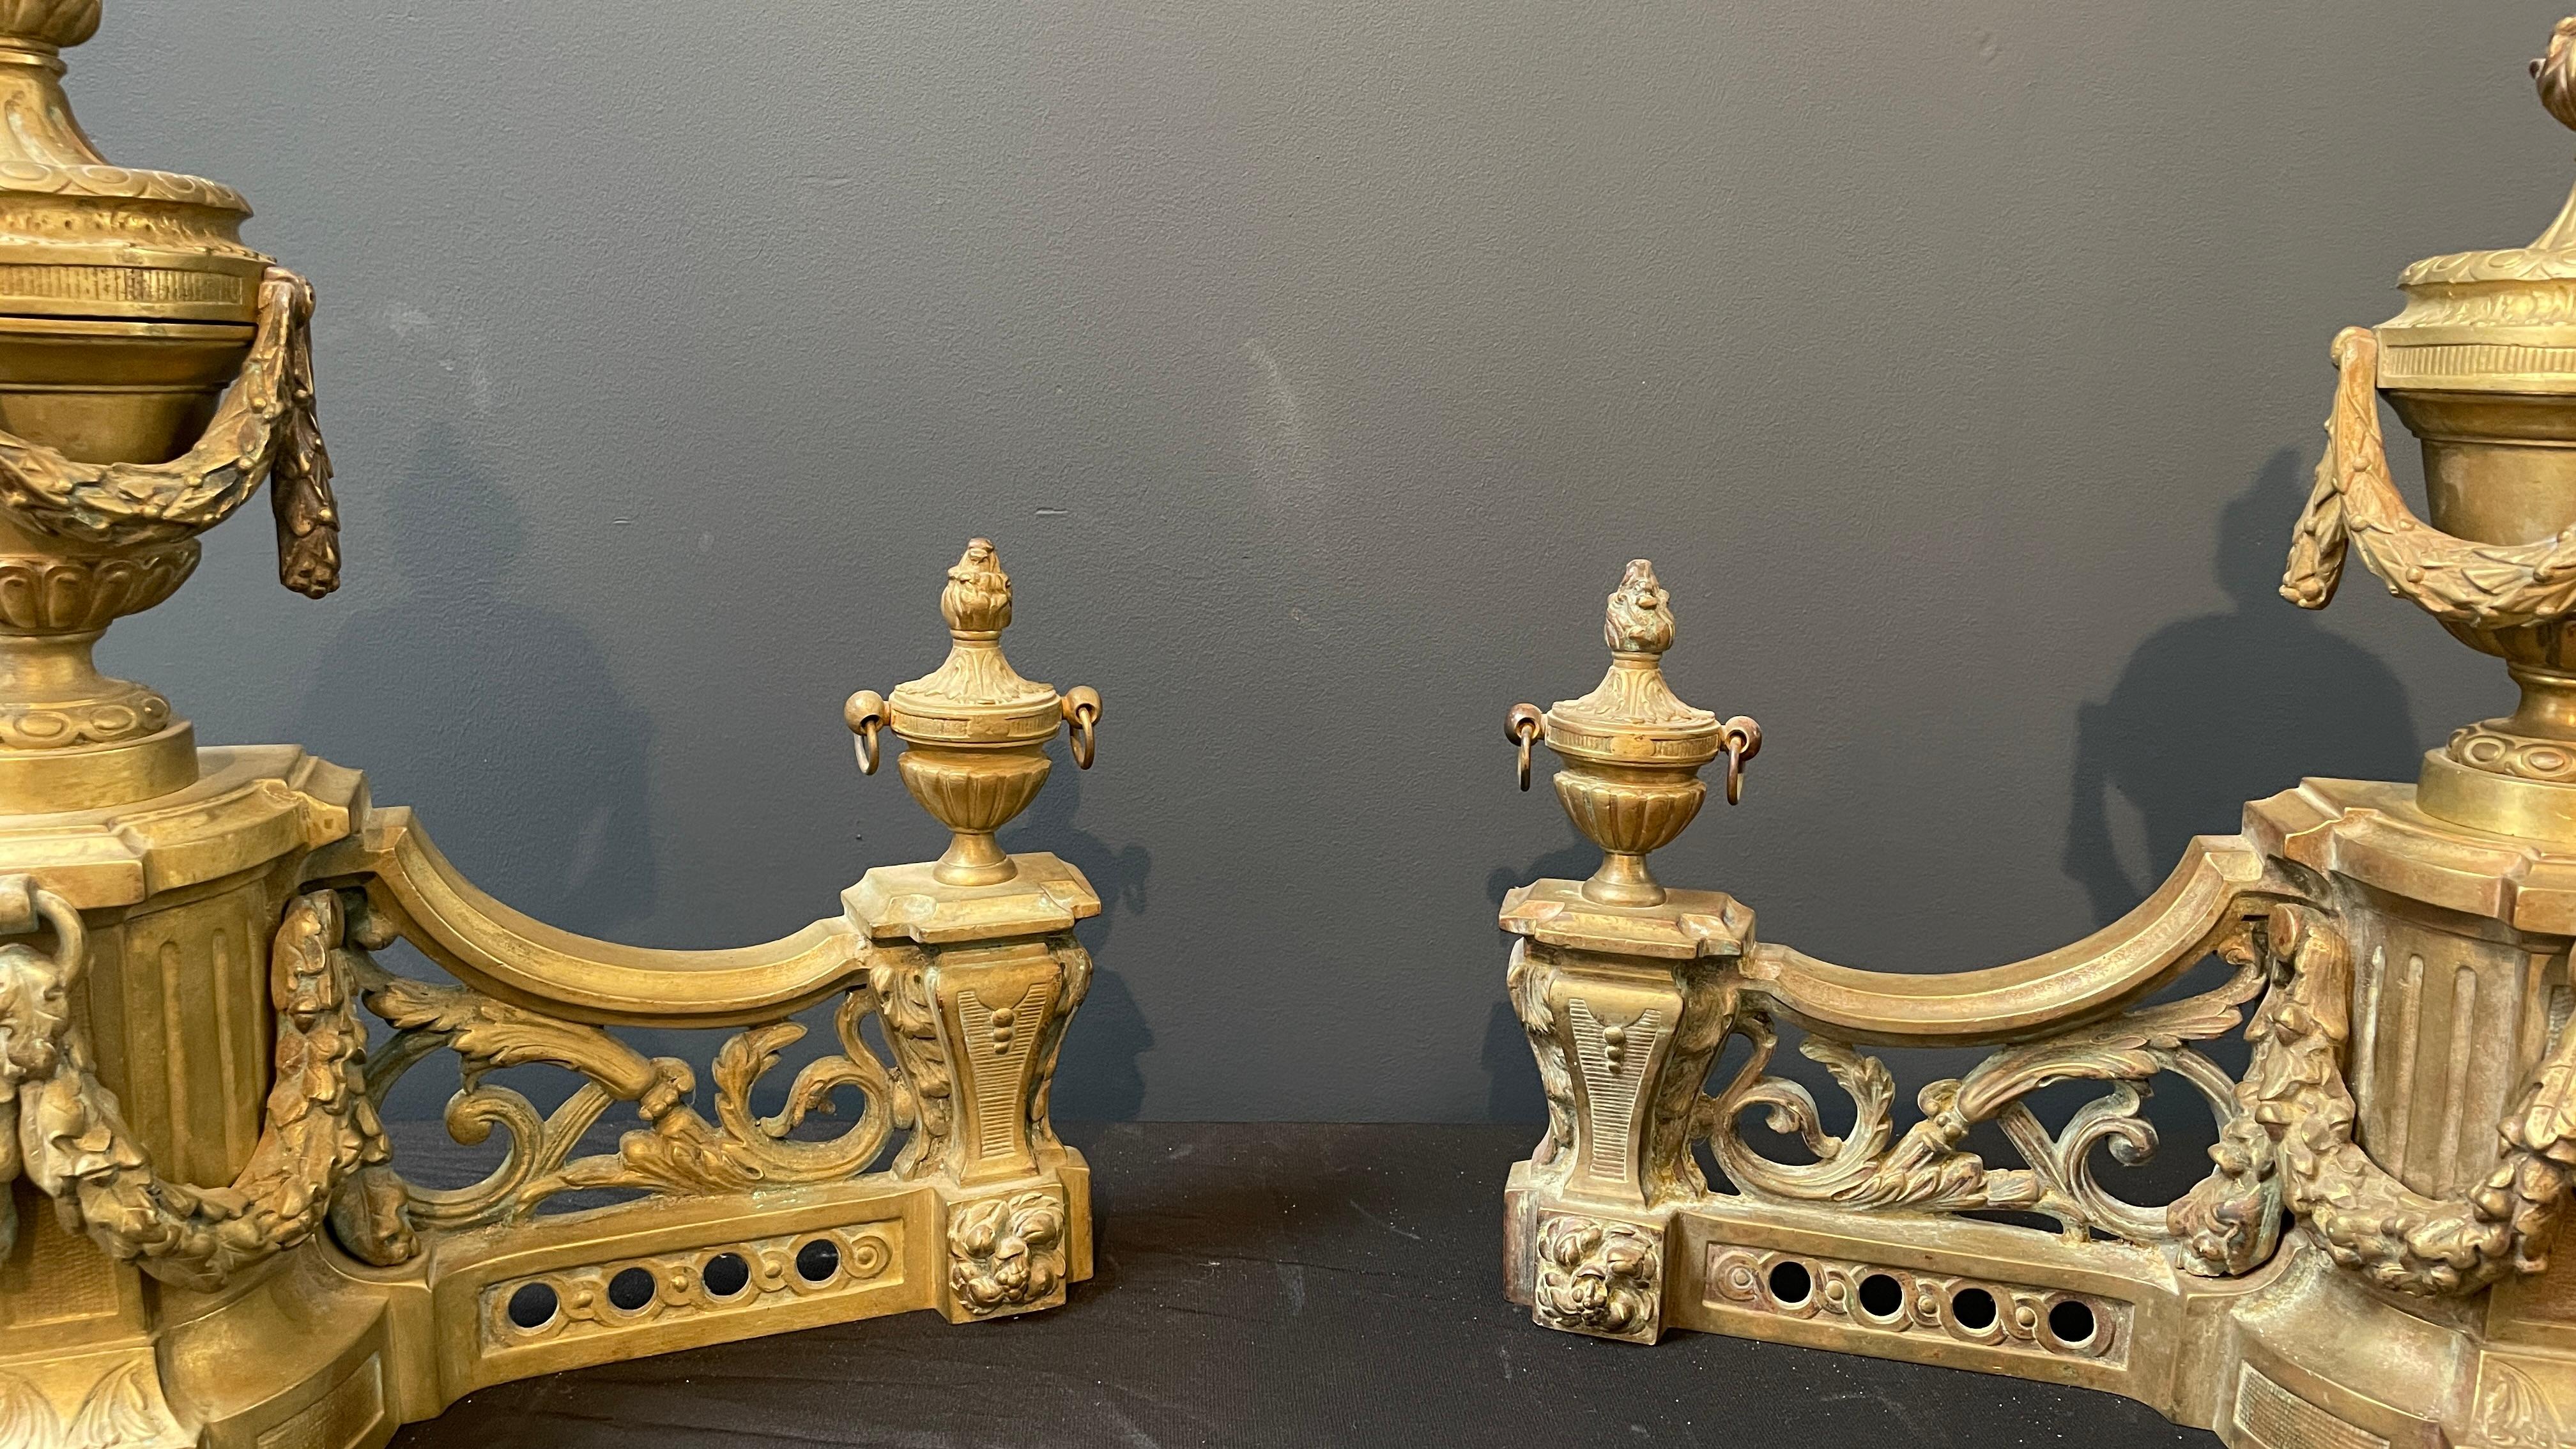 Beautiful set of antique French brass firebombs. The details on these items are just stunning.
 